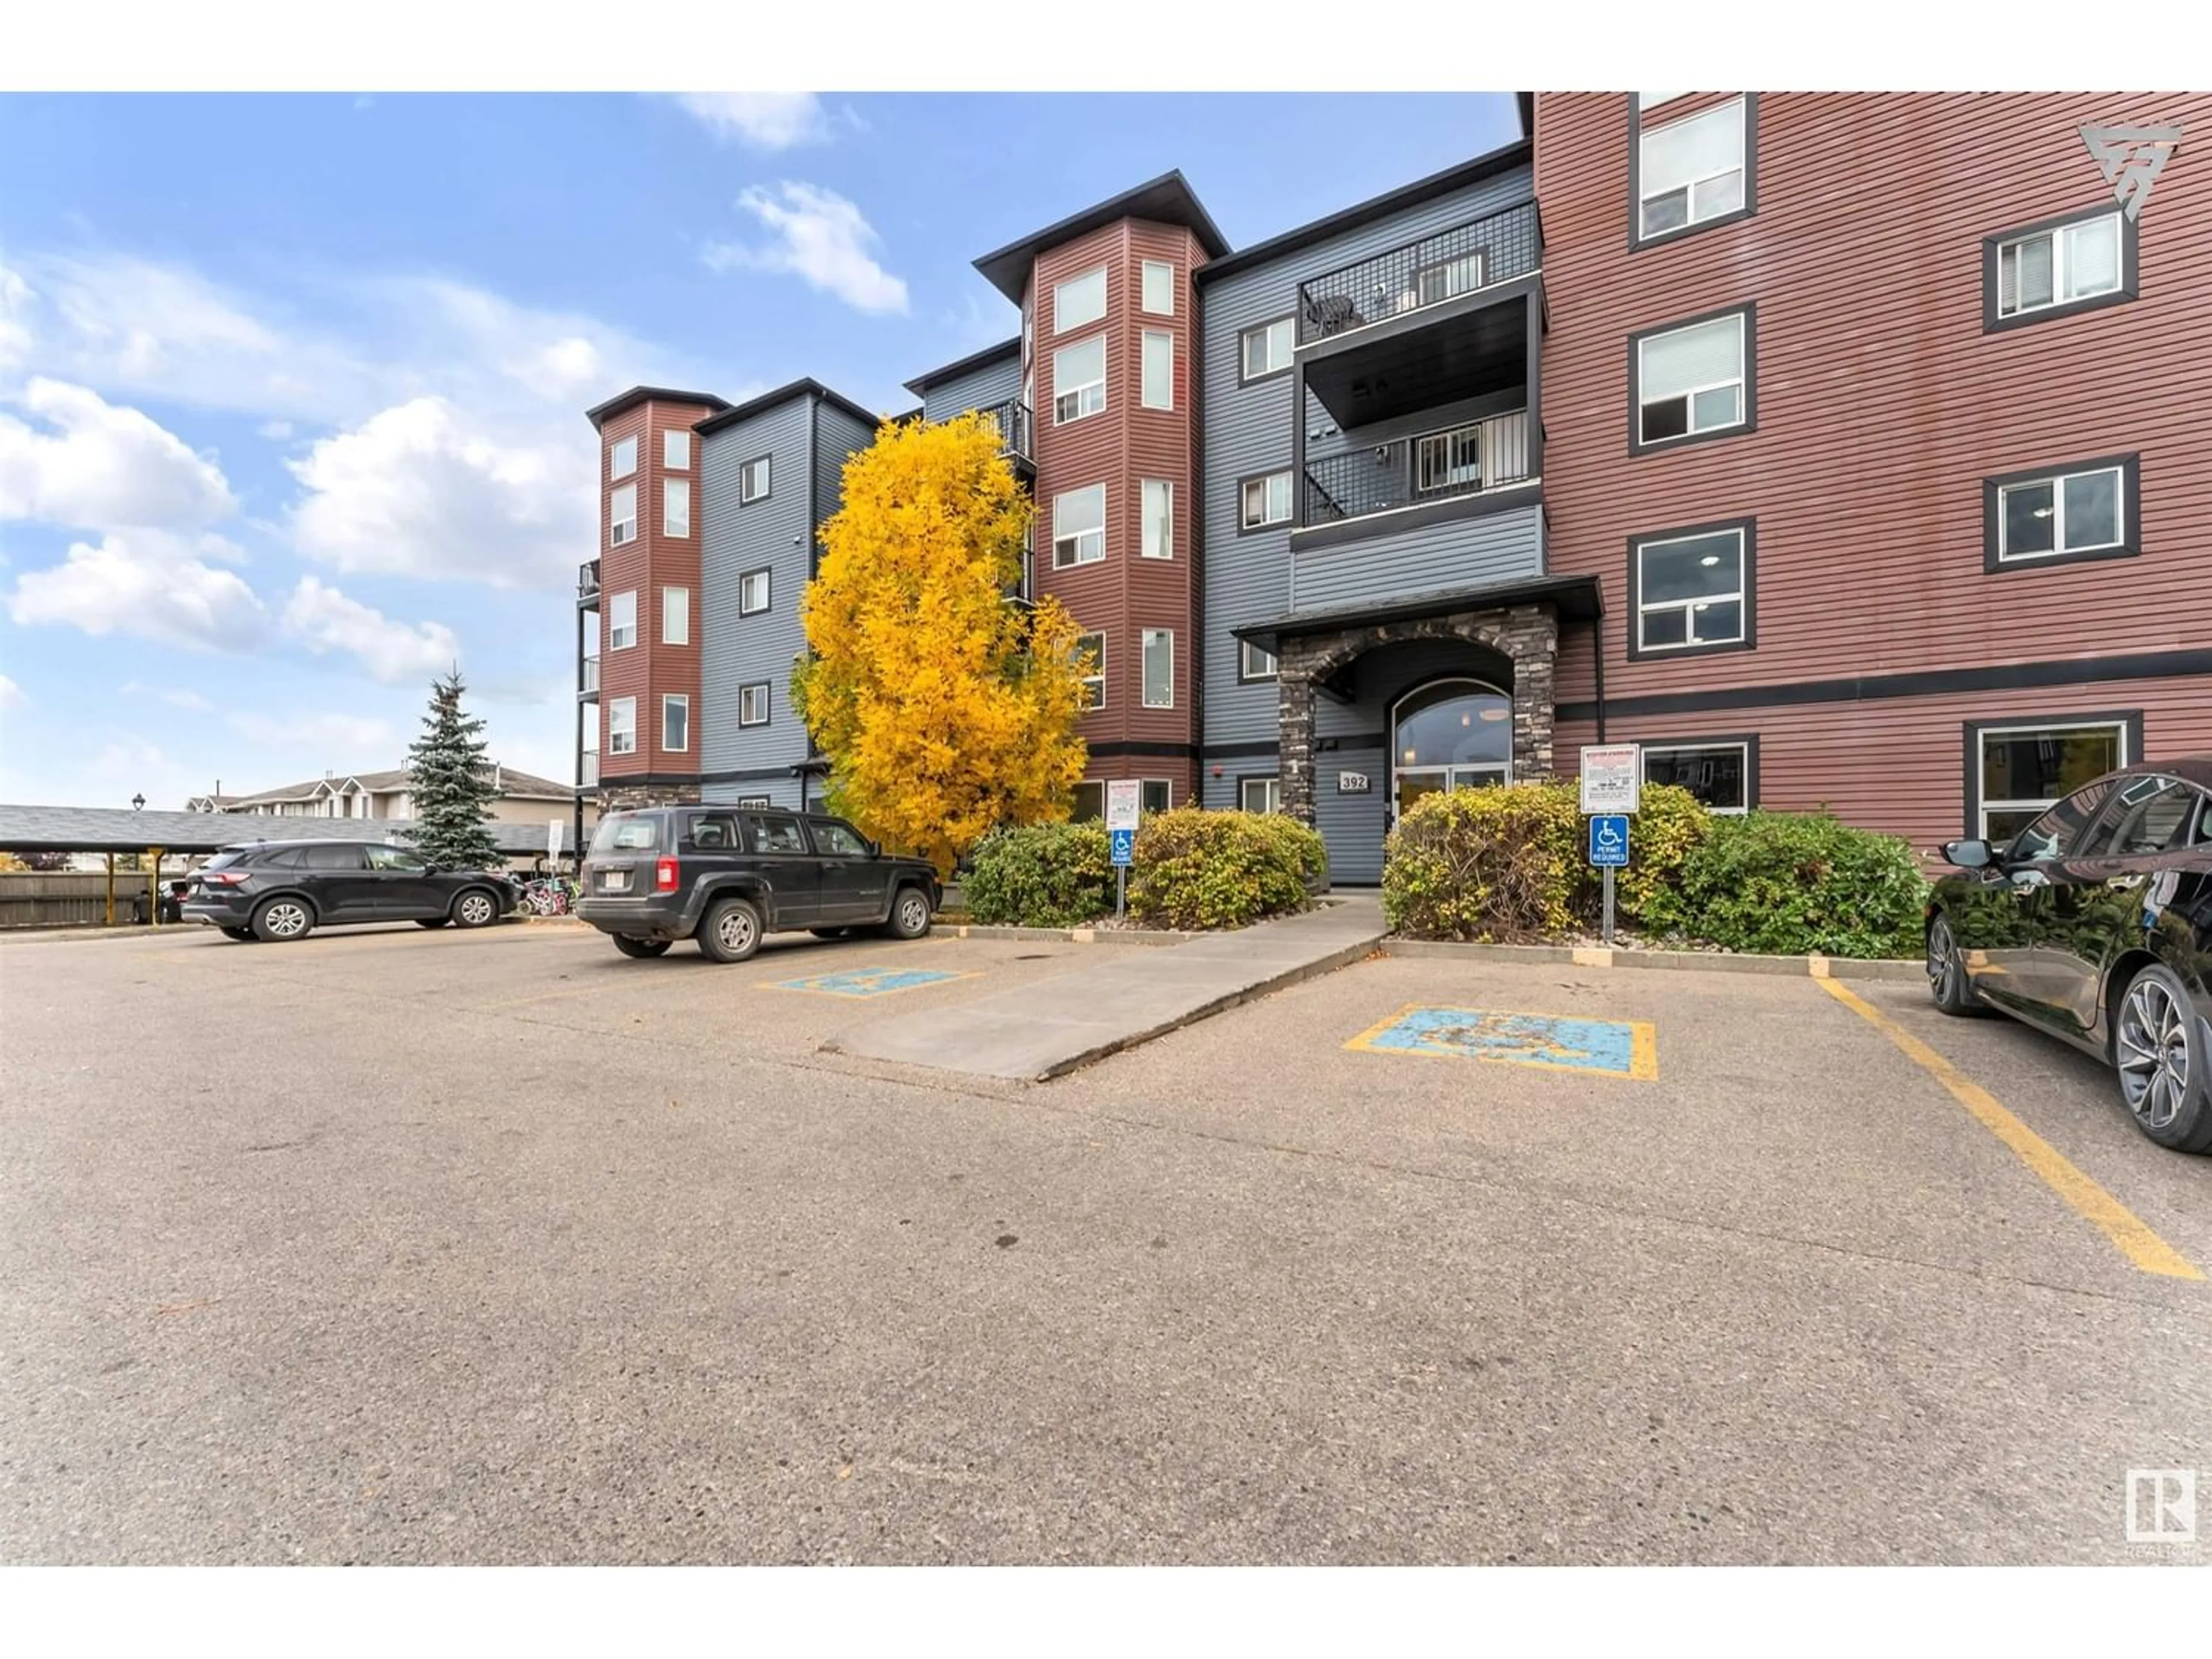 A pic from exterior of the house or condo for #418 392 SILVER BERRY RD NW, Edmonton Alberta T6T0H1